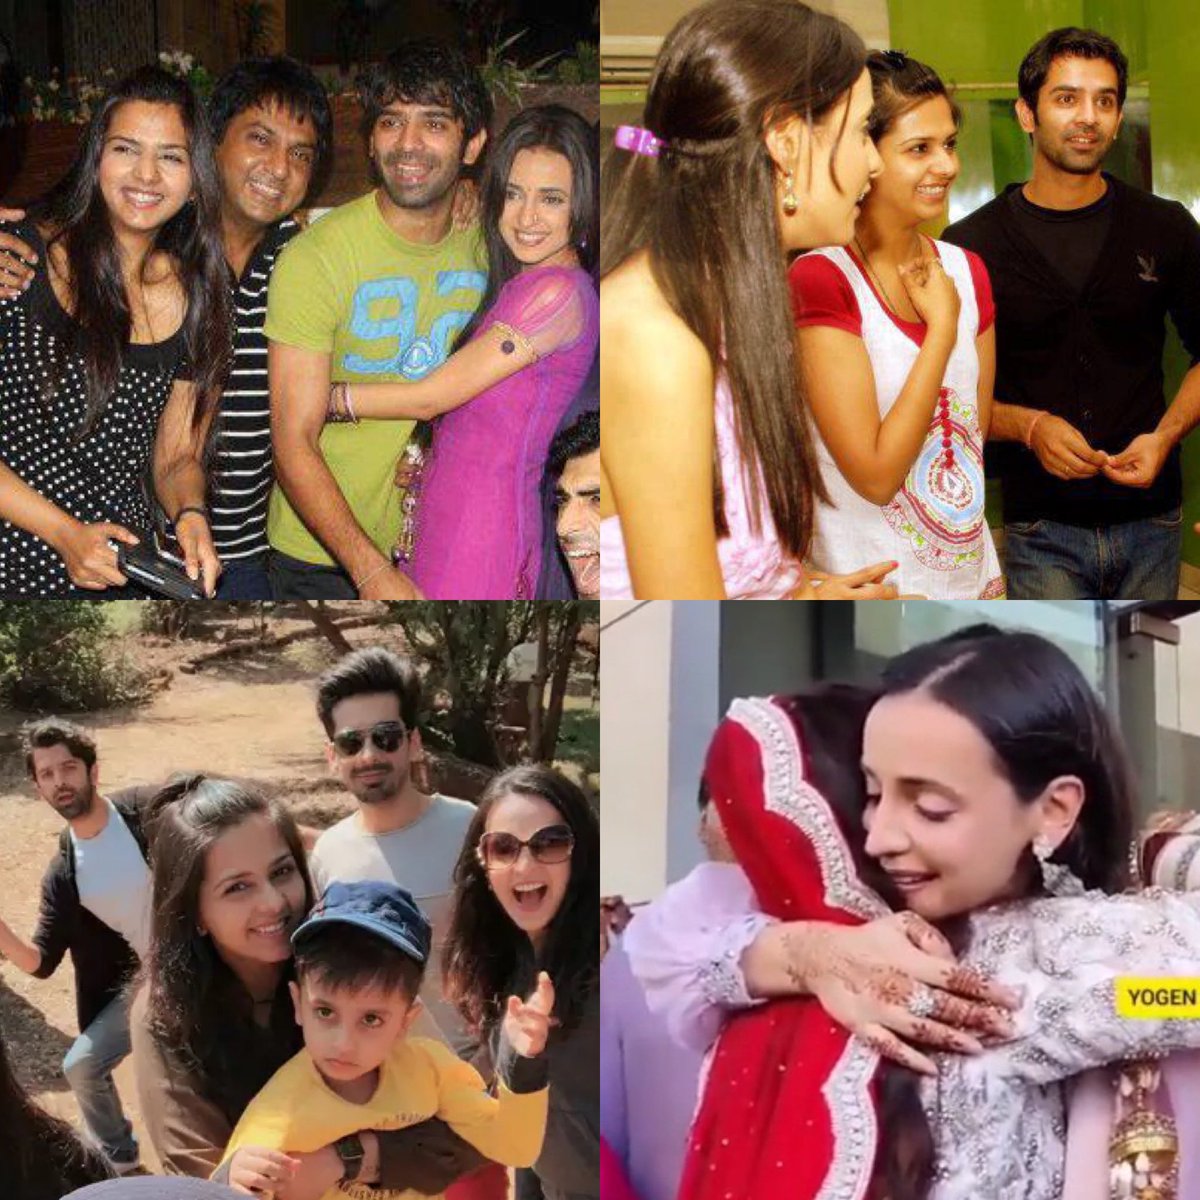 Sanaya , Barun , Dalljiet 😭😢❤️ .. seeing them all together makes me emotional now as Dalljiet has moved to another country .. they were all together at her wedding too #SanayaIrani #BarunSobti #DalljietKaur #IPKKND #IssPyaarKoKyaNaamDoon